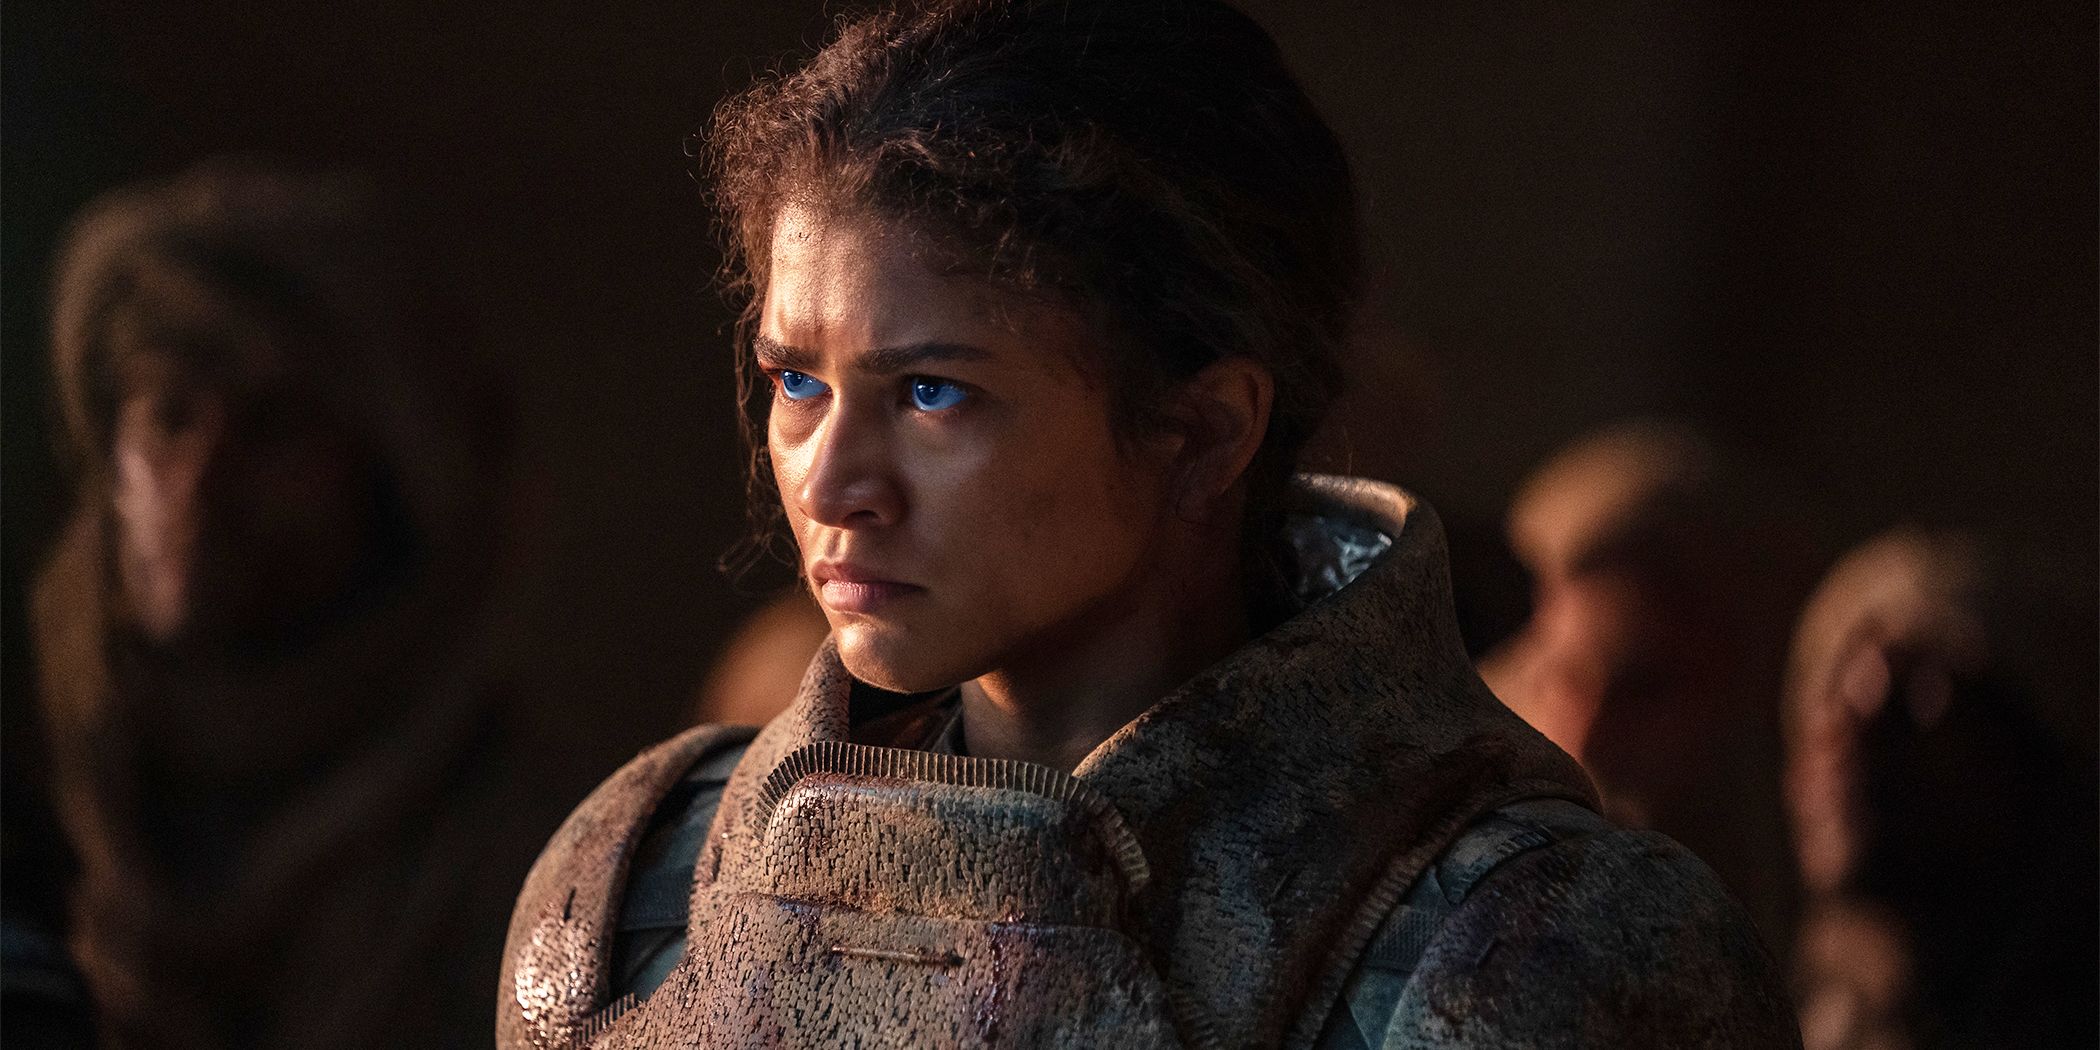 Zendaya as Chani looking up angrily defiant in Dune: Part Two